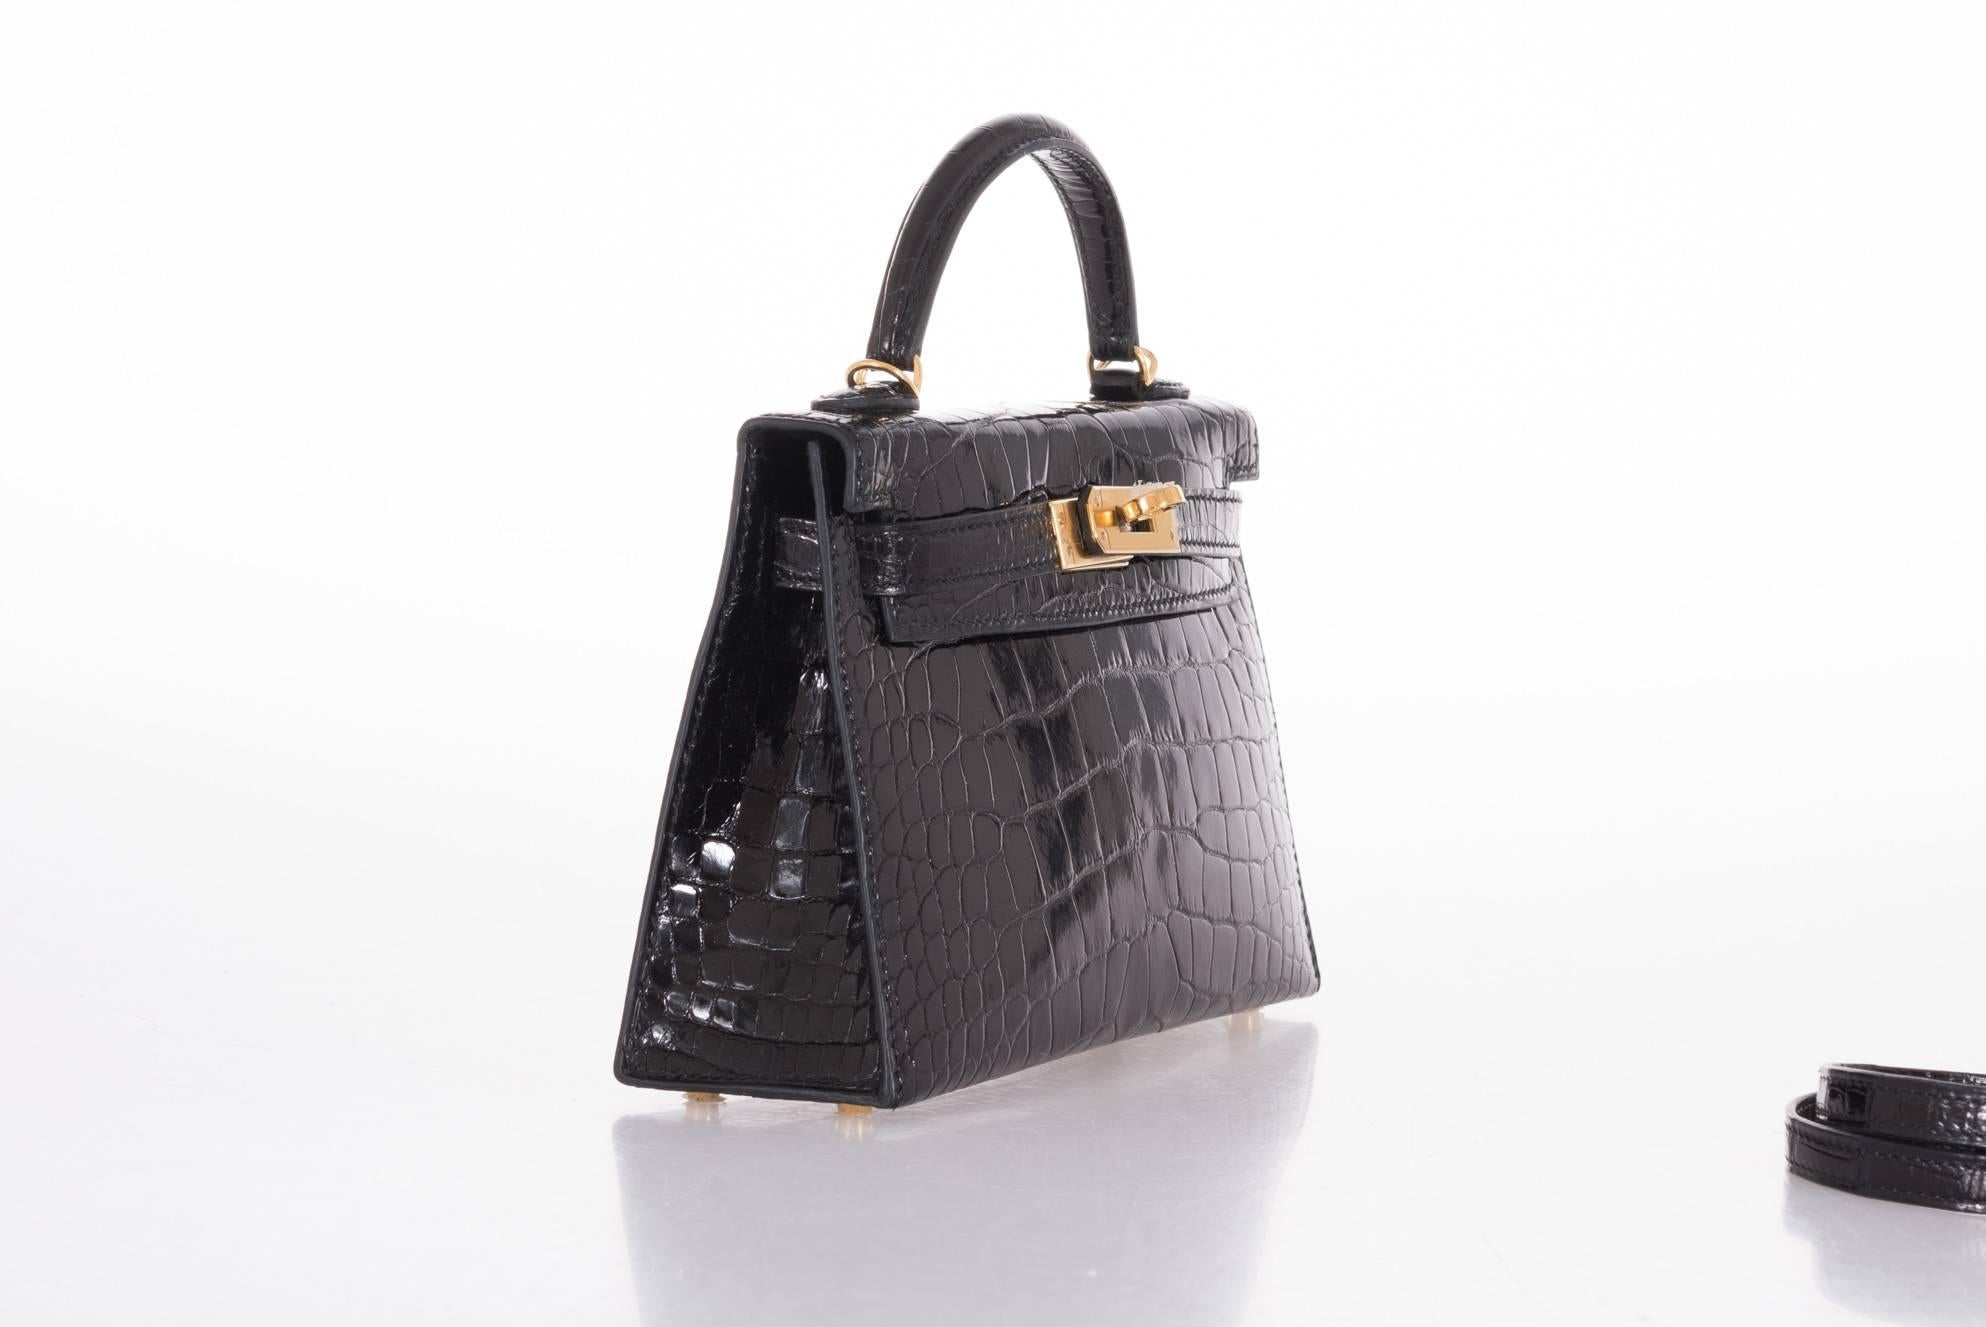 New limited edition Hermes Kelly you have never seen before! 
Hermes 20cm Kelly in stunning new black shiny alligator with gold hardware.

This 20cm cross body Kelly is big enough to fit an iPhone 6/7 plus! Very limited production and only offered